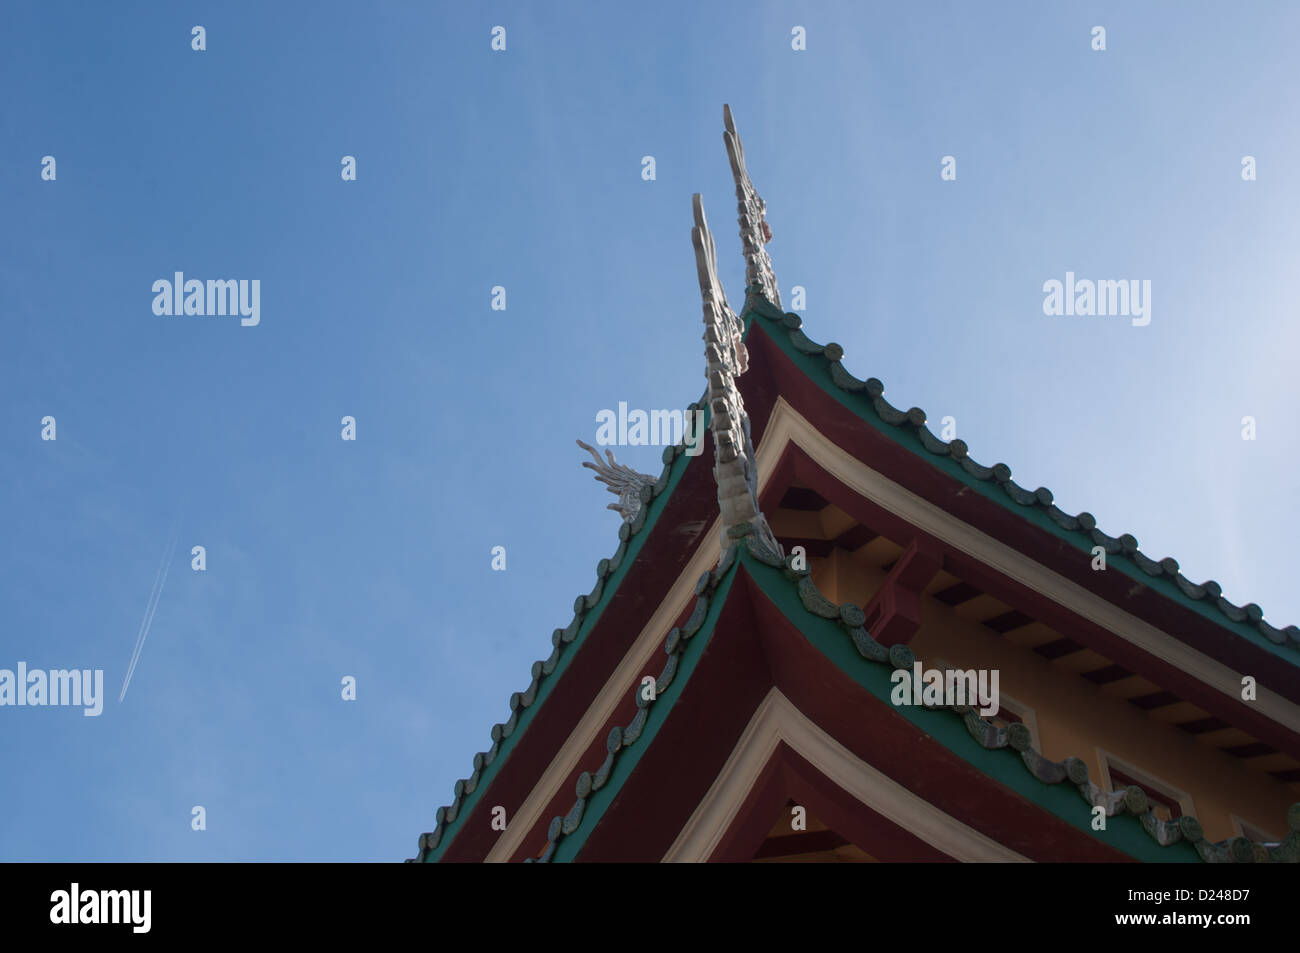 View of the edge of a temple at Linh Ung Pagoda with the contrail from an aircraft Da Nang Vietnam Stock Photo